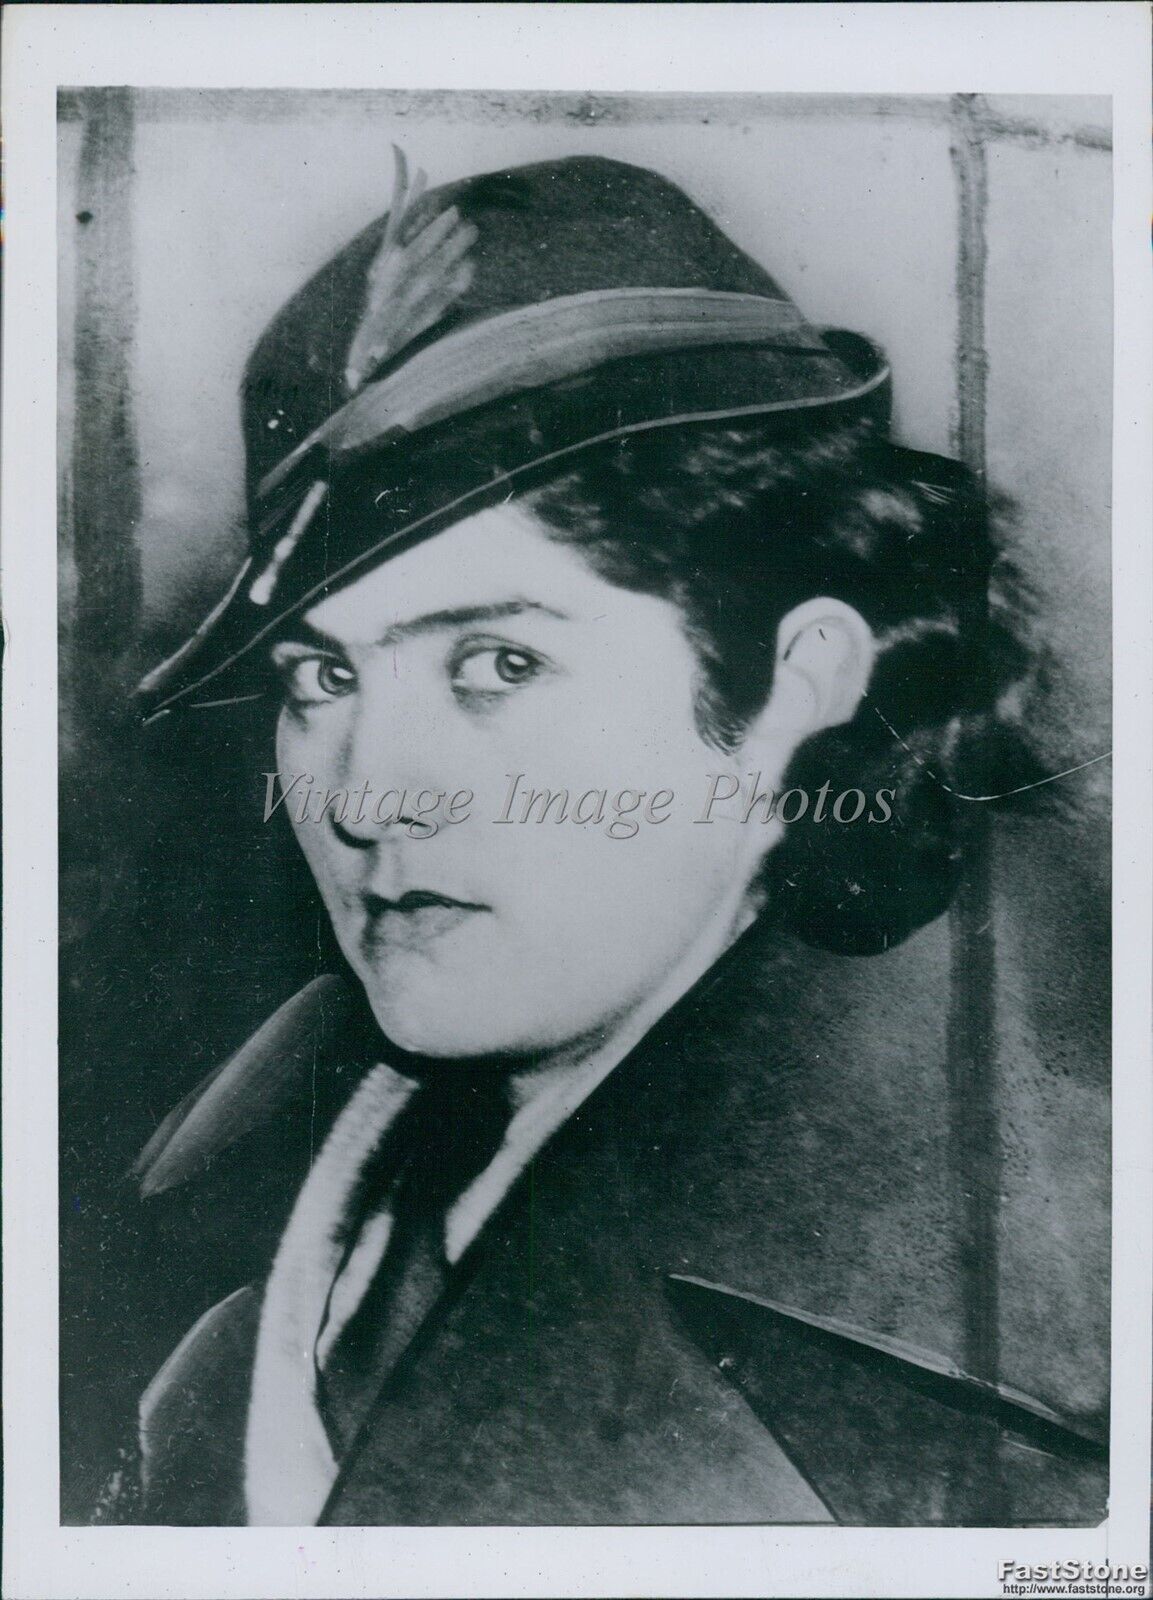 1936 Margaret Mosely Member Vice Ring New Jersey Arrested Wirephoto 5X7